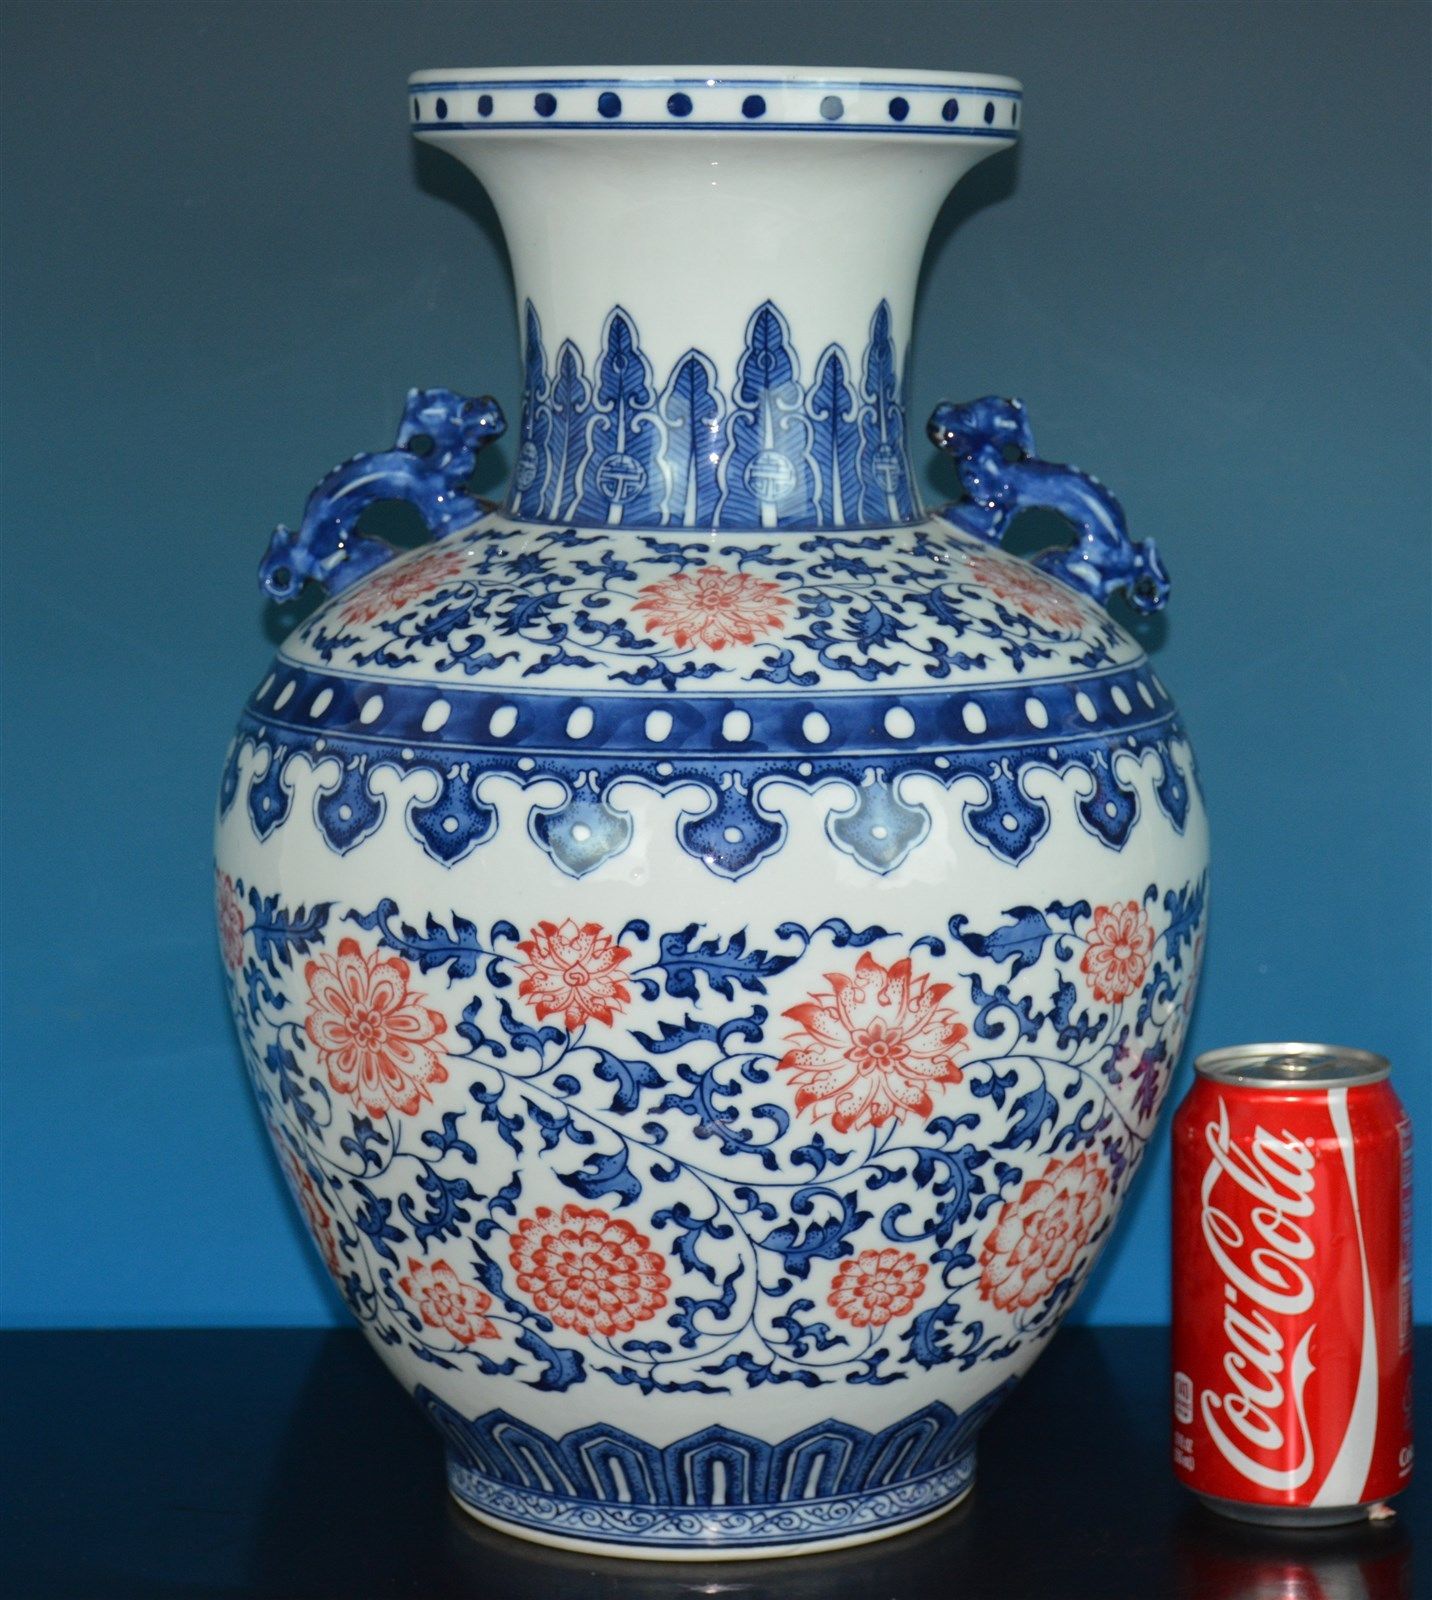 FINE LARGE CHINESE BLUE AND WHITE PORCELAIN VASE MARKED QIANLONG L7192